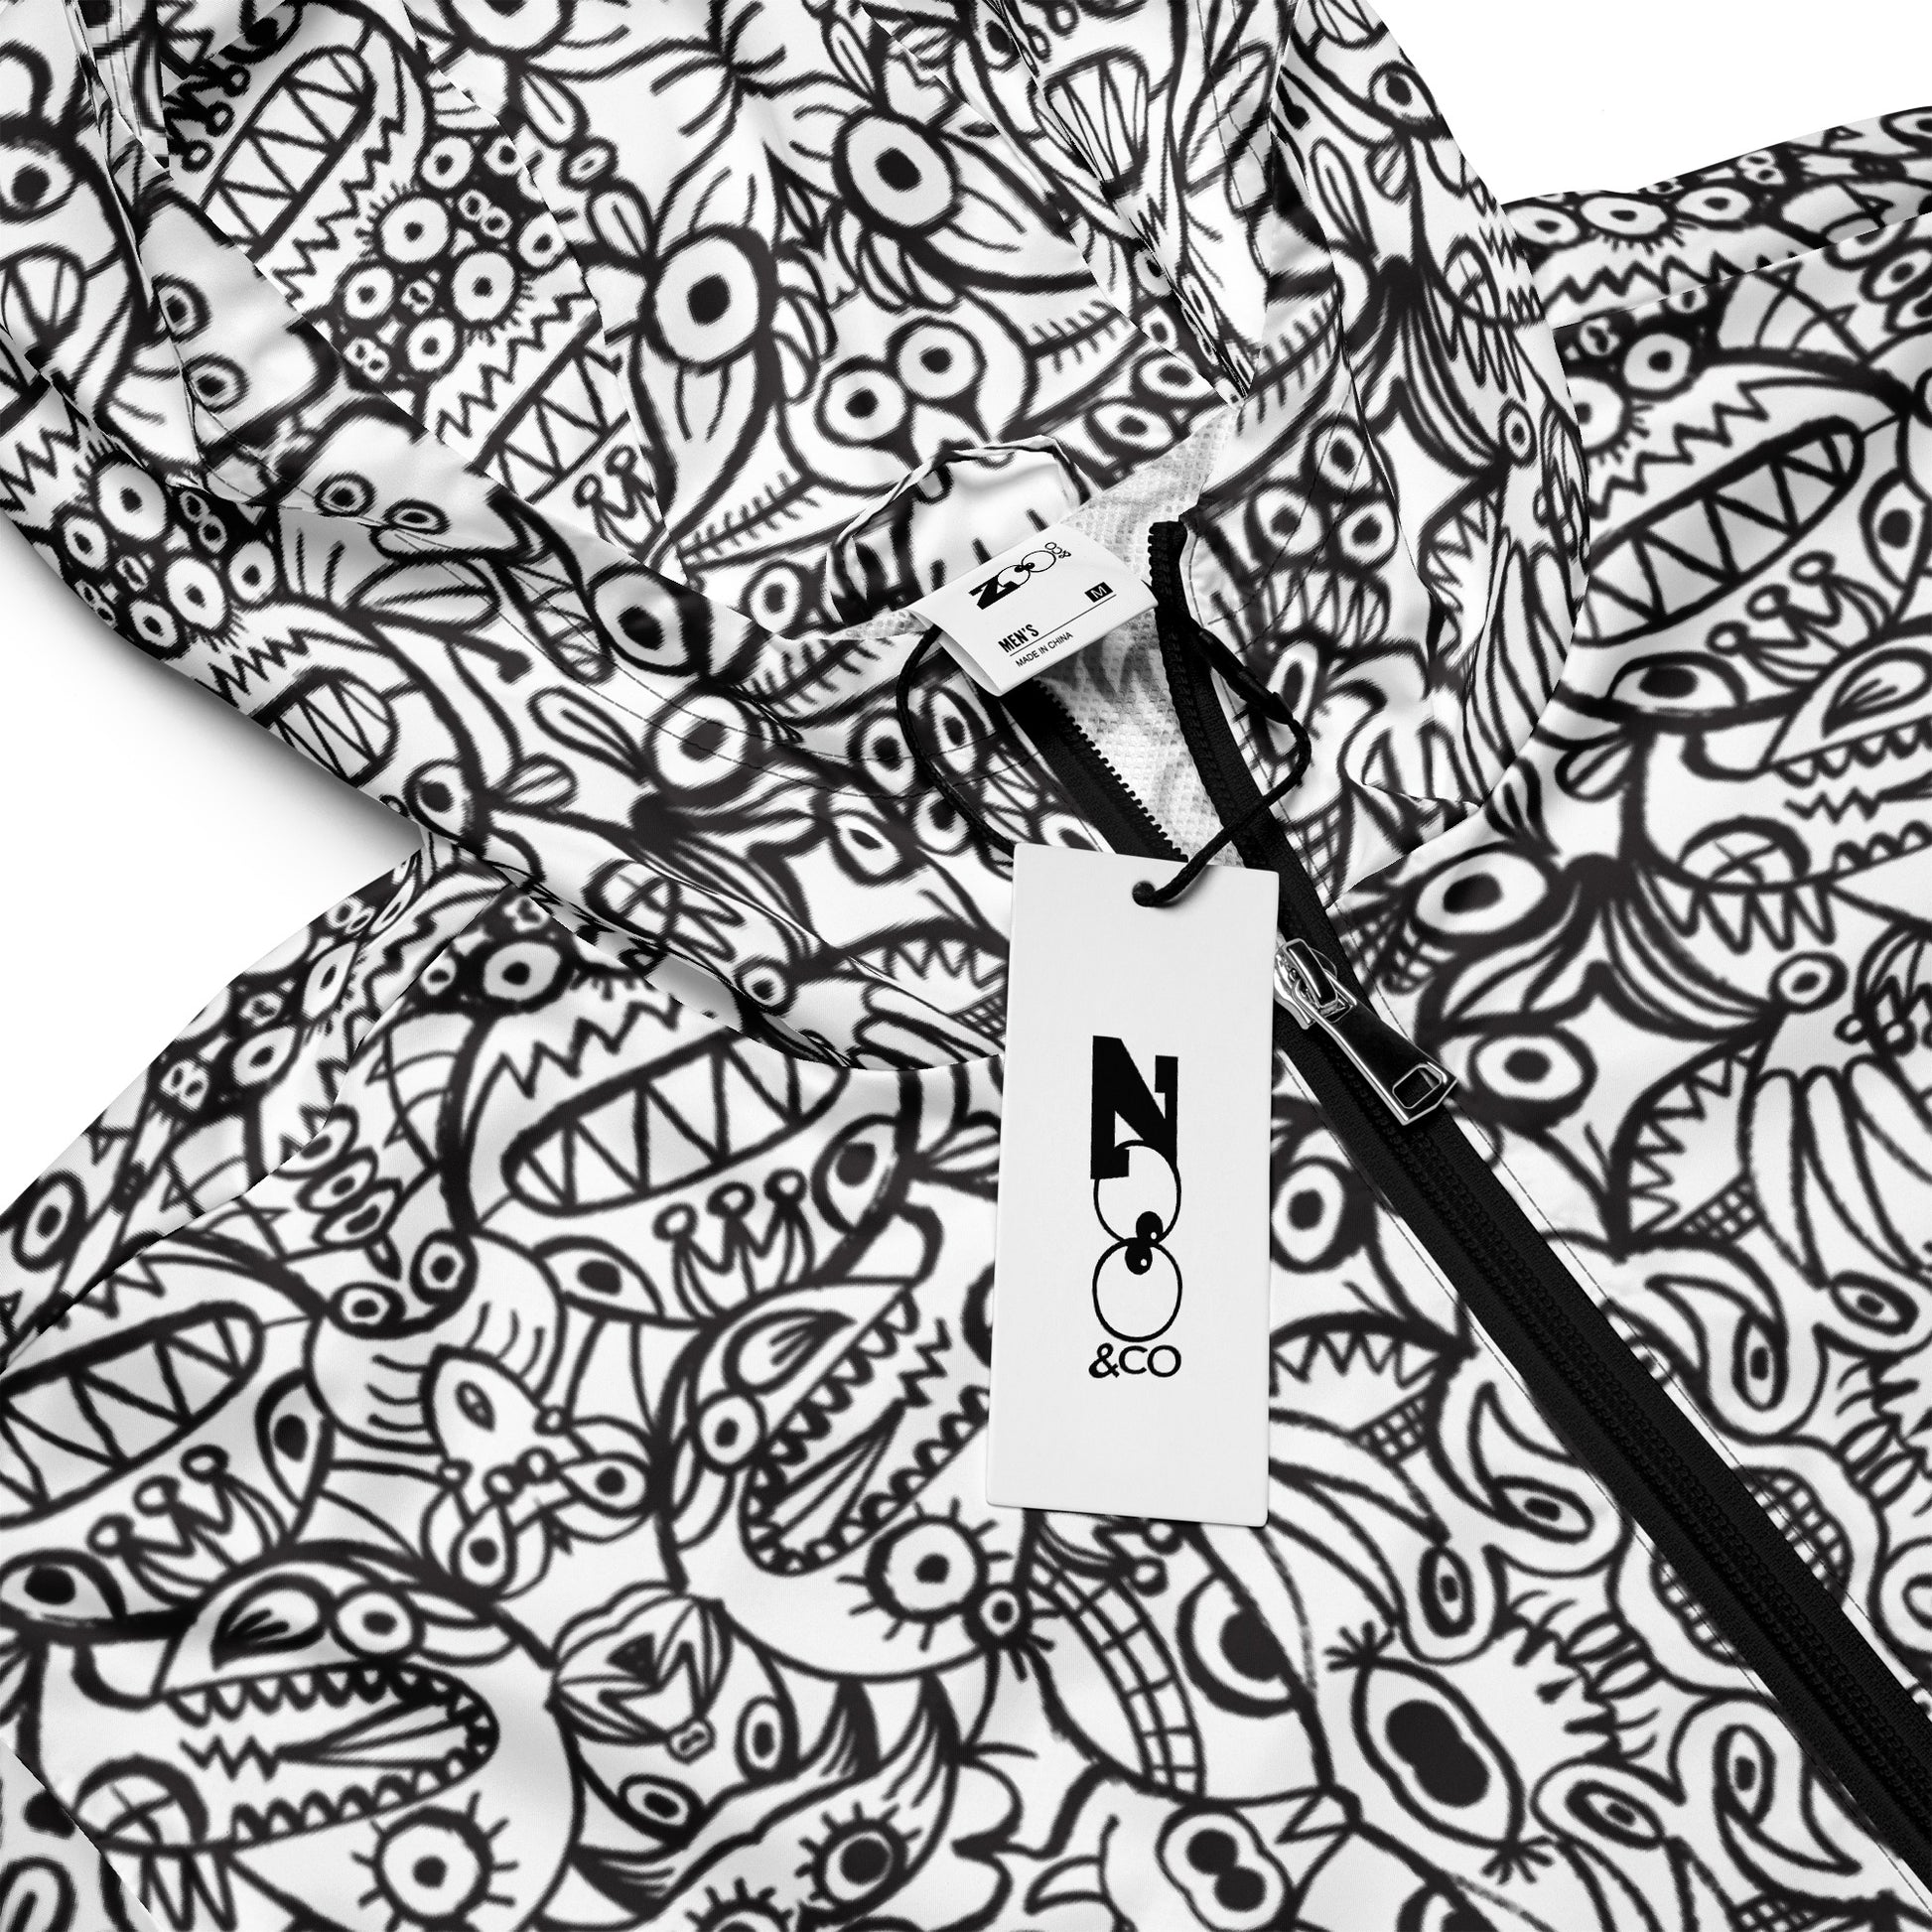 Brush Style Doodle Critters - Men’s windbreaker. Product detail